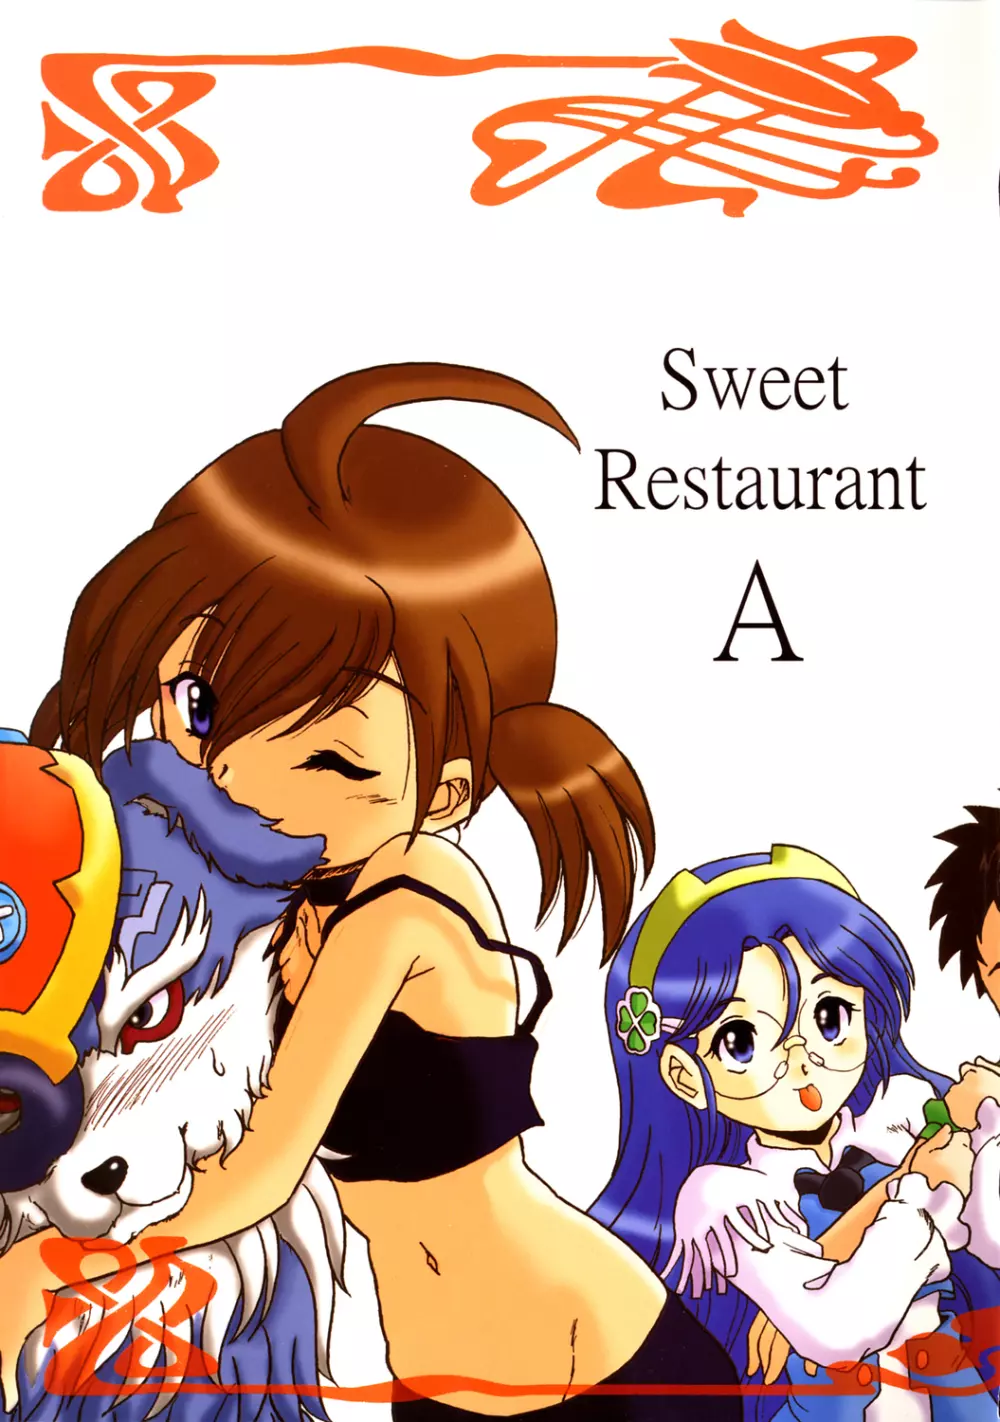 Sweet Restaurant A - page1